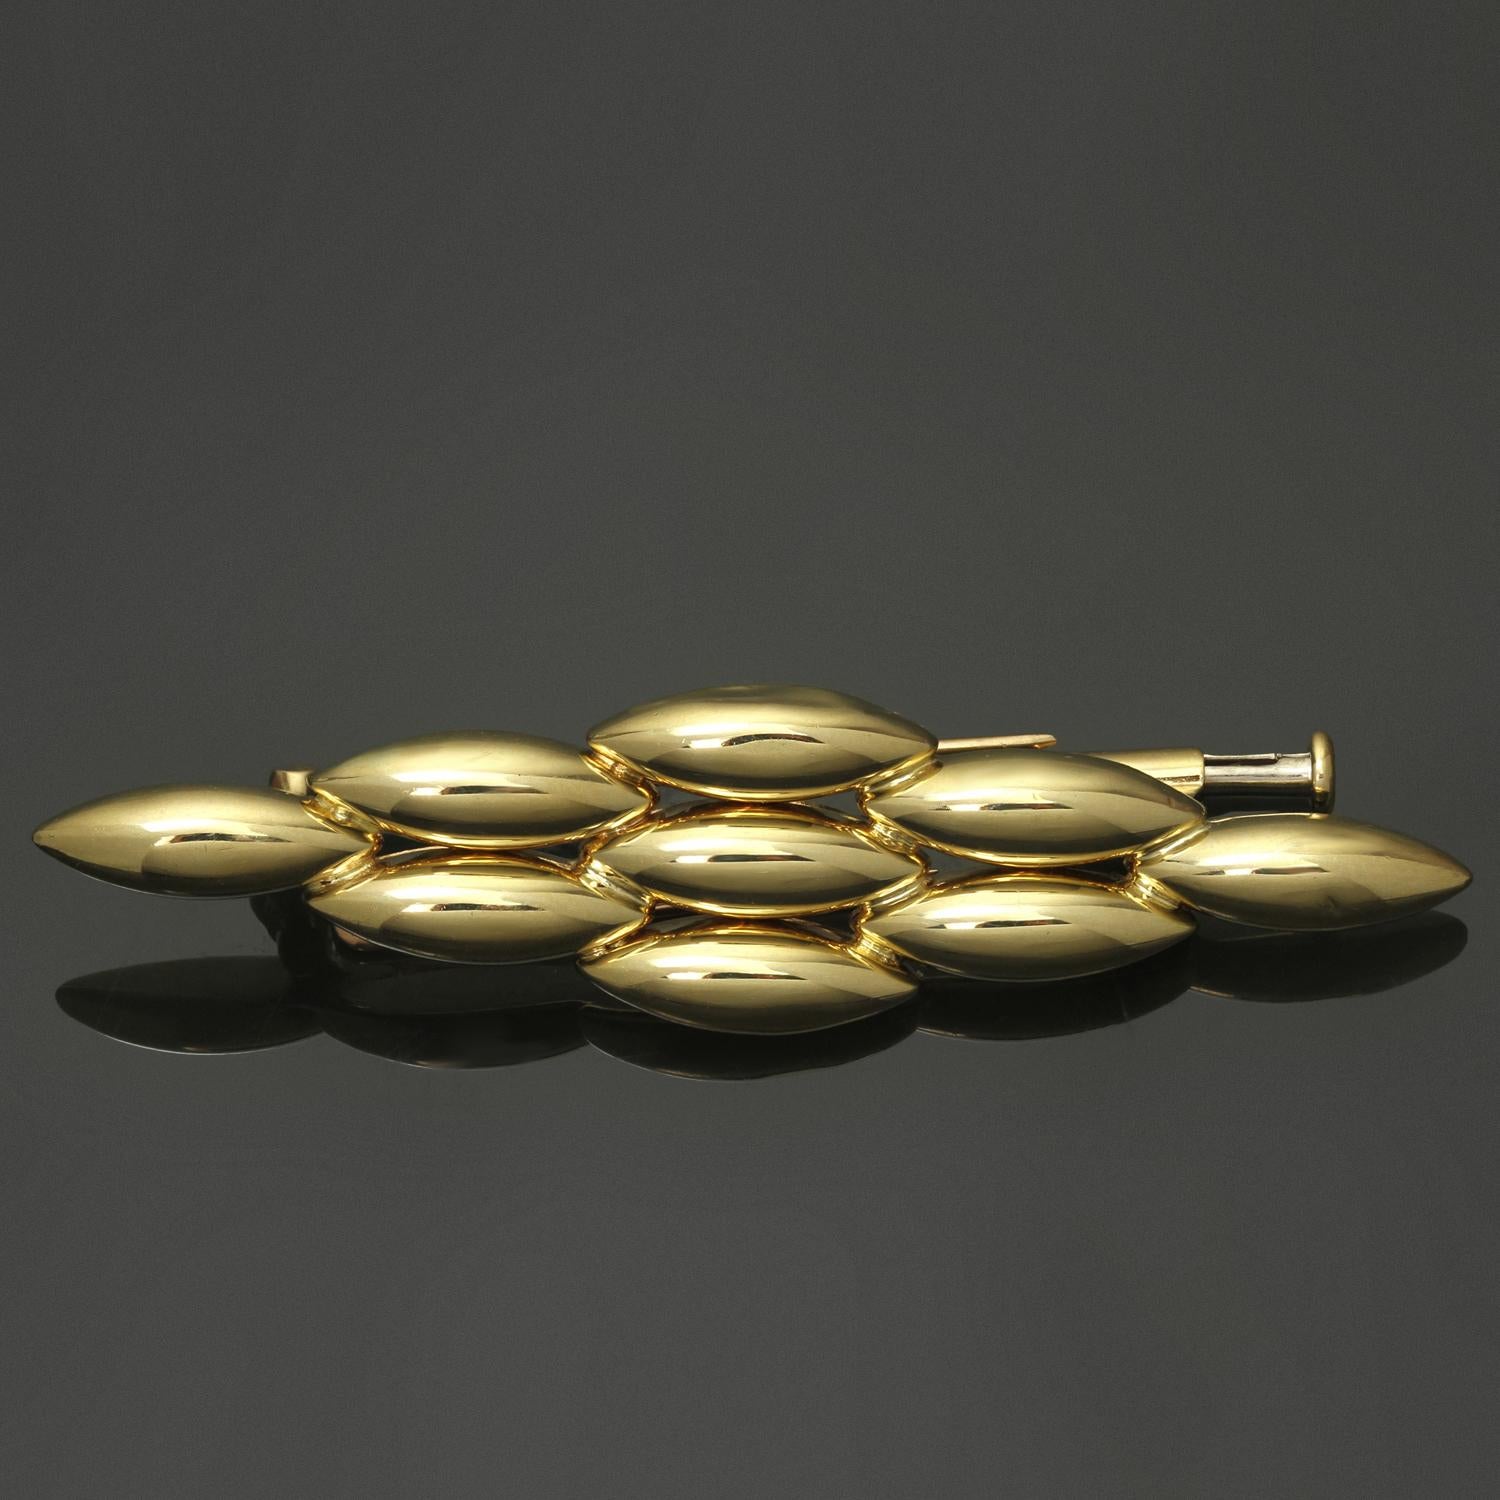 This chic brooch from the iconic Gentiane collection features a fluid almond shape link design made in 18k yellow gold. Made in France circa 1980s. Measurements: 0.51